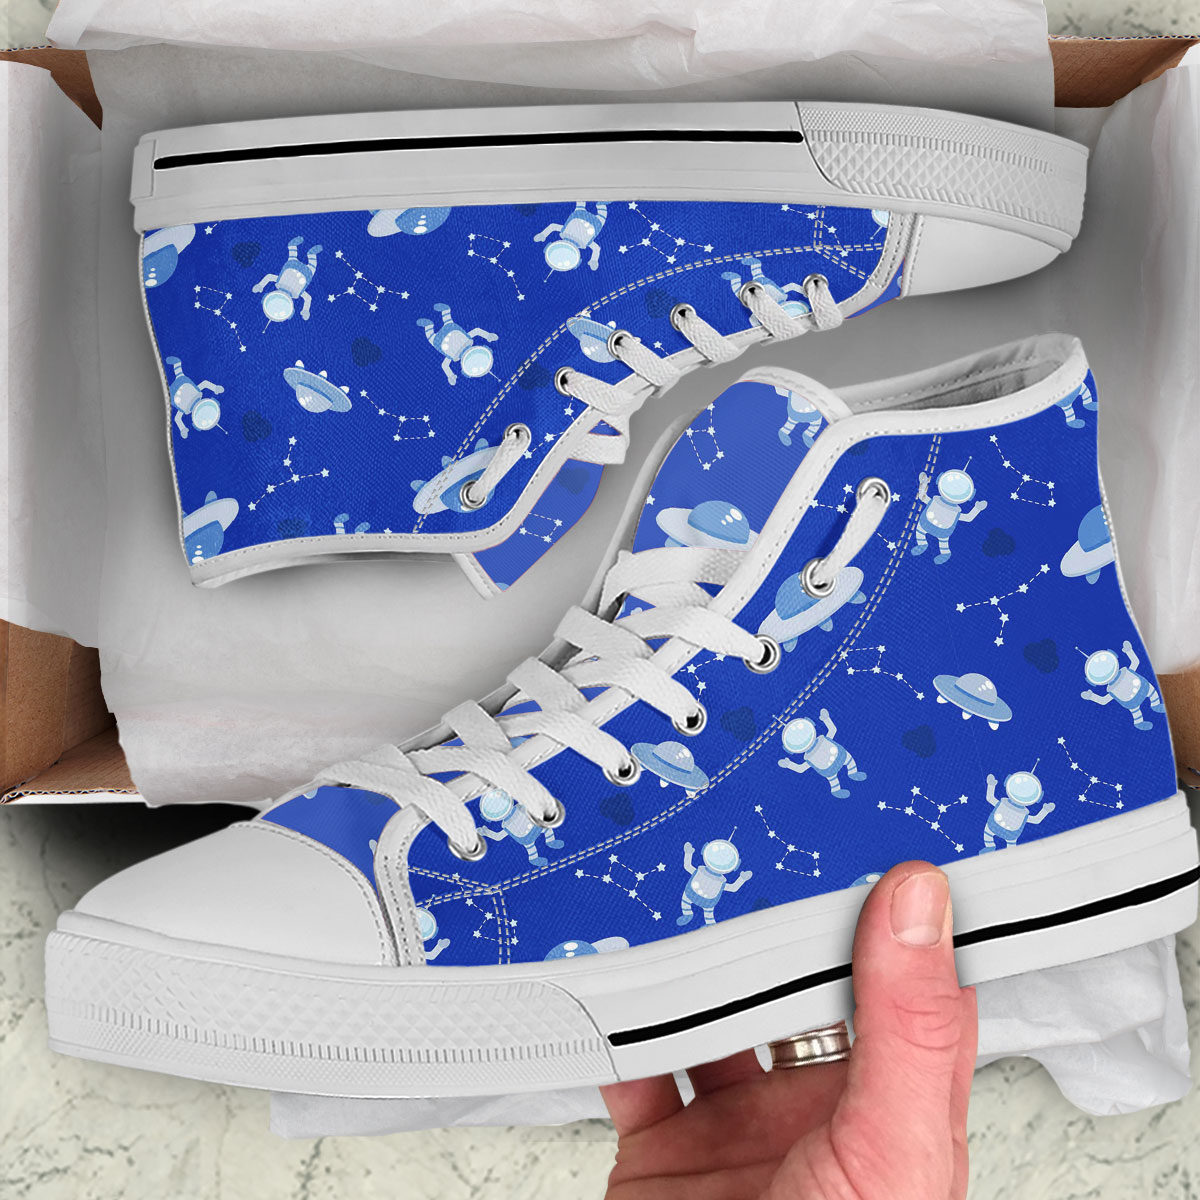 Astronauts Spaceships And Constellation High Top Shoes